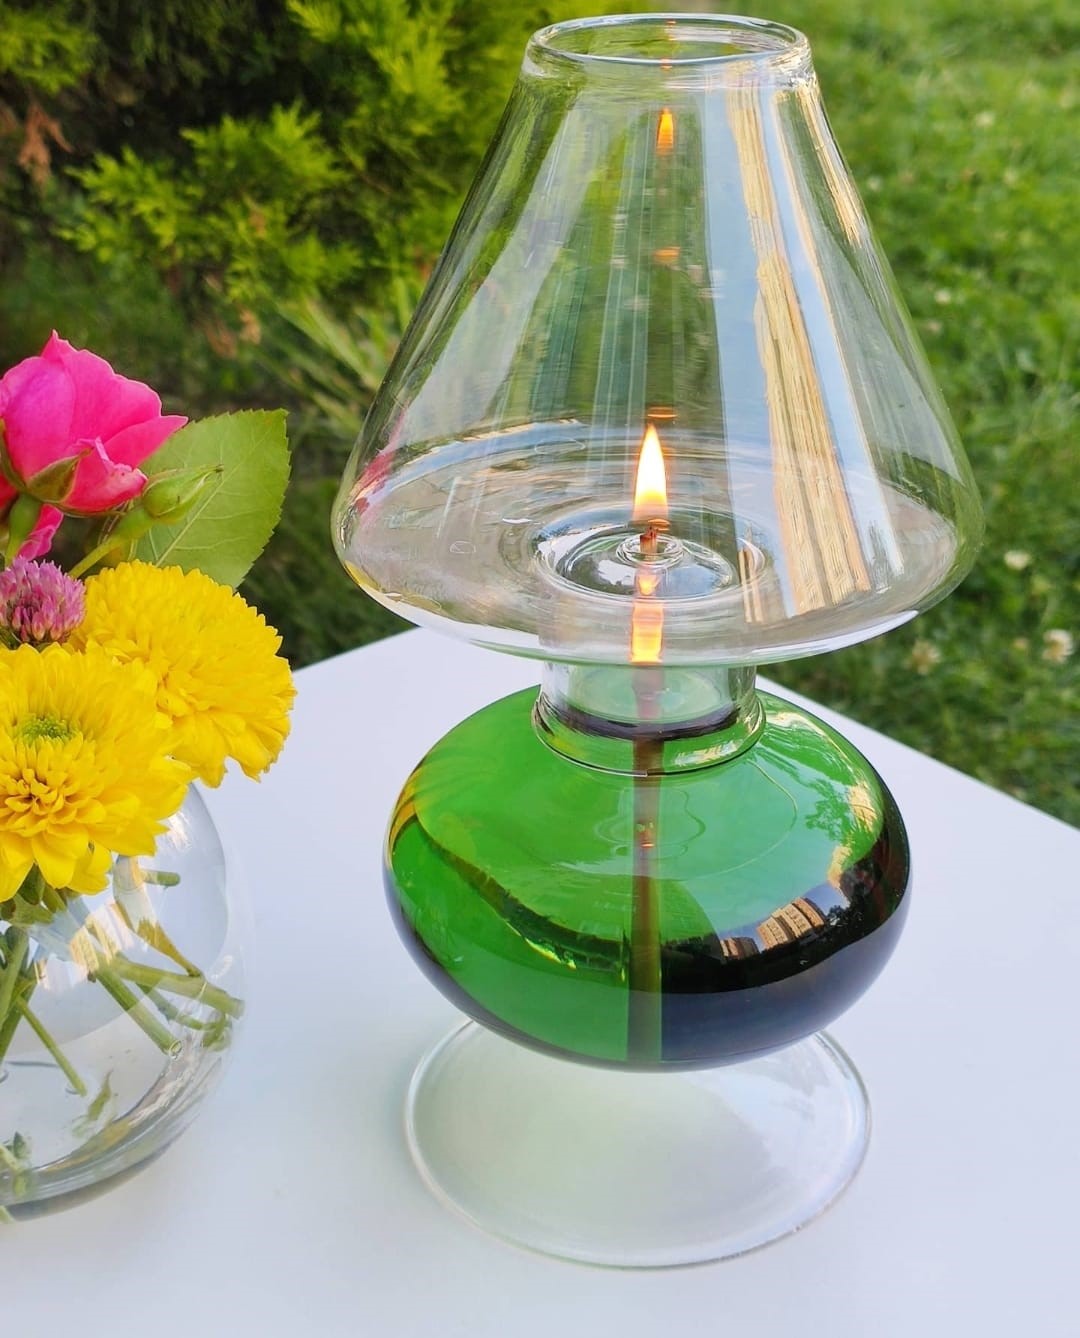 Quem Luxe Handmade Glass Oil Lampshade with Glass Wick for Indoor and Outdoor, Modern Glass Decor for Home and Office.